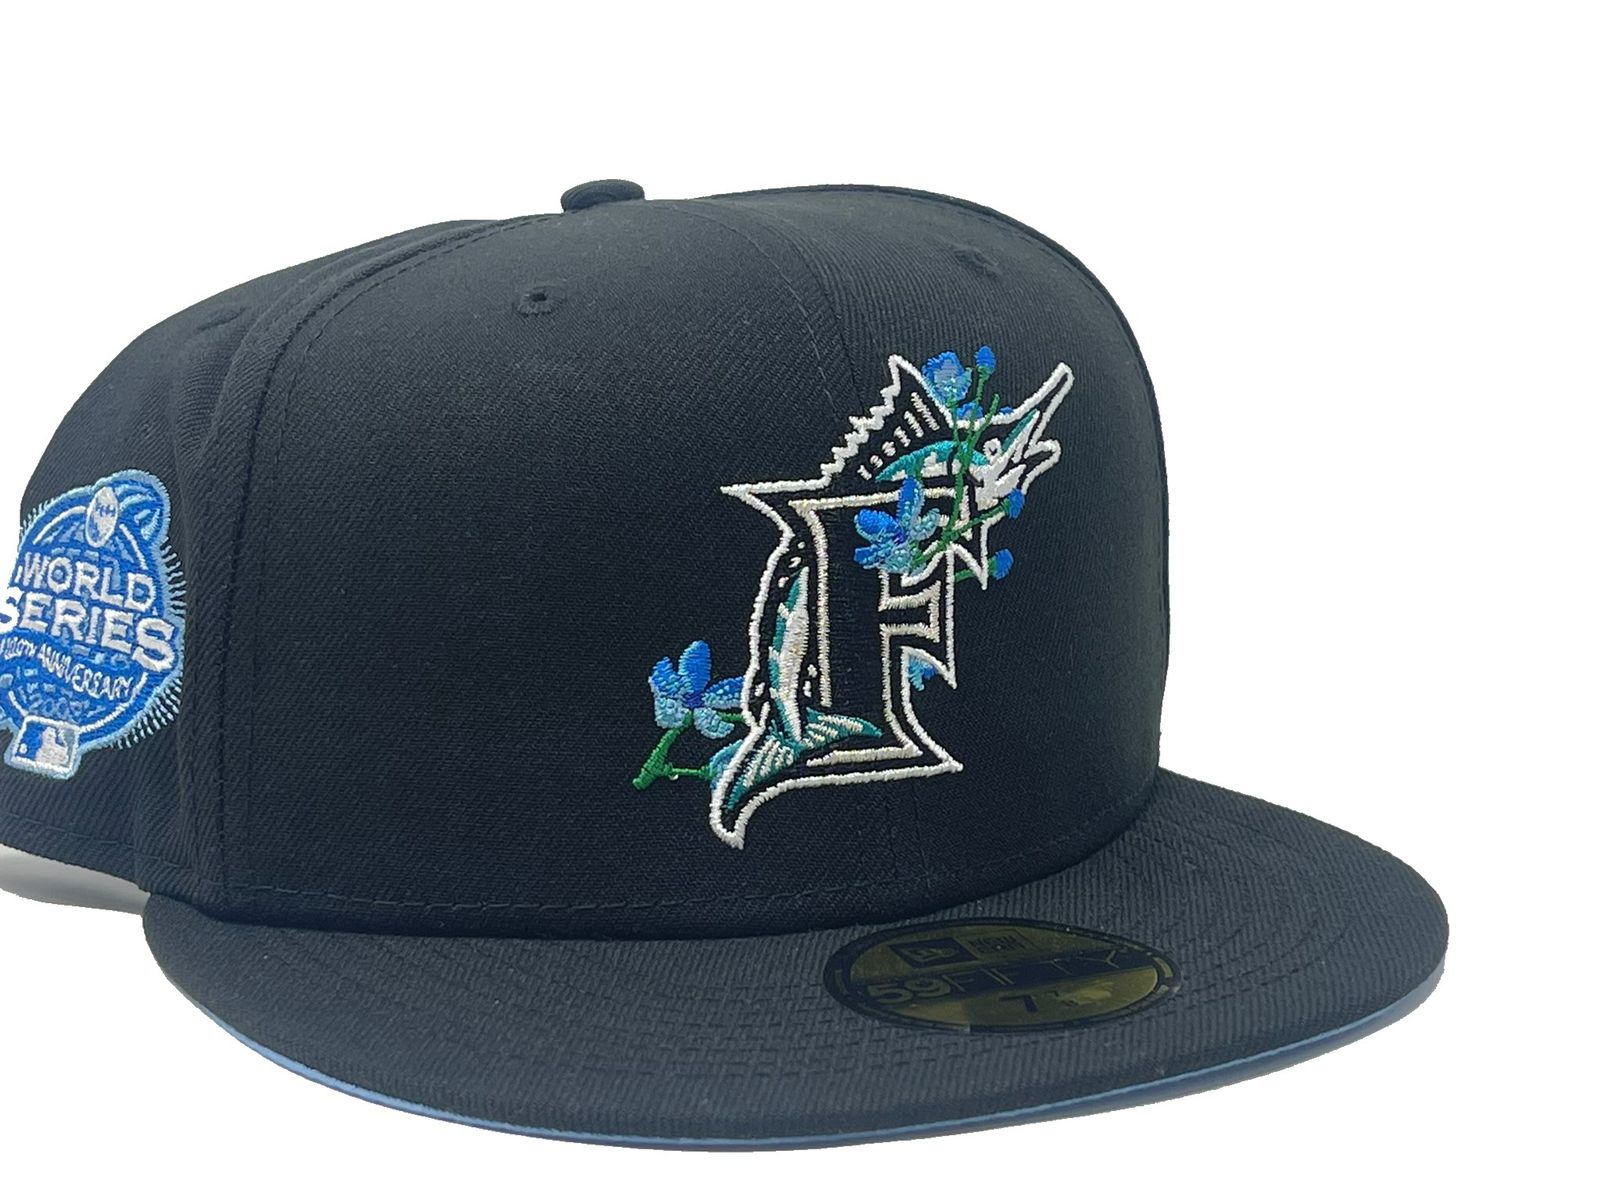 Florida Marlins WORLD SERIES SIDE PATCH Black Fitted Hat